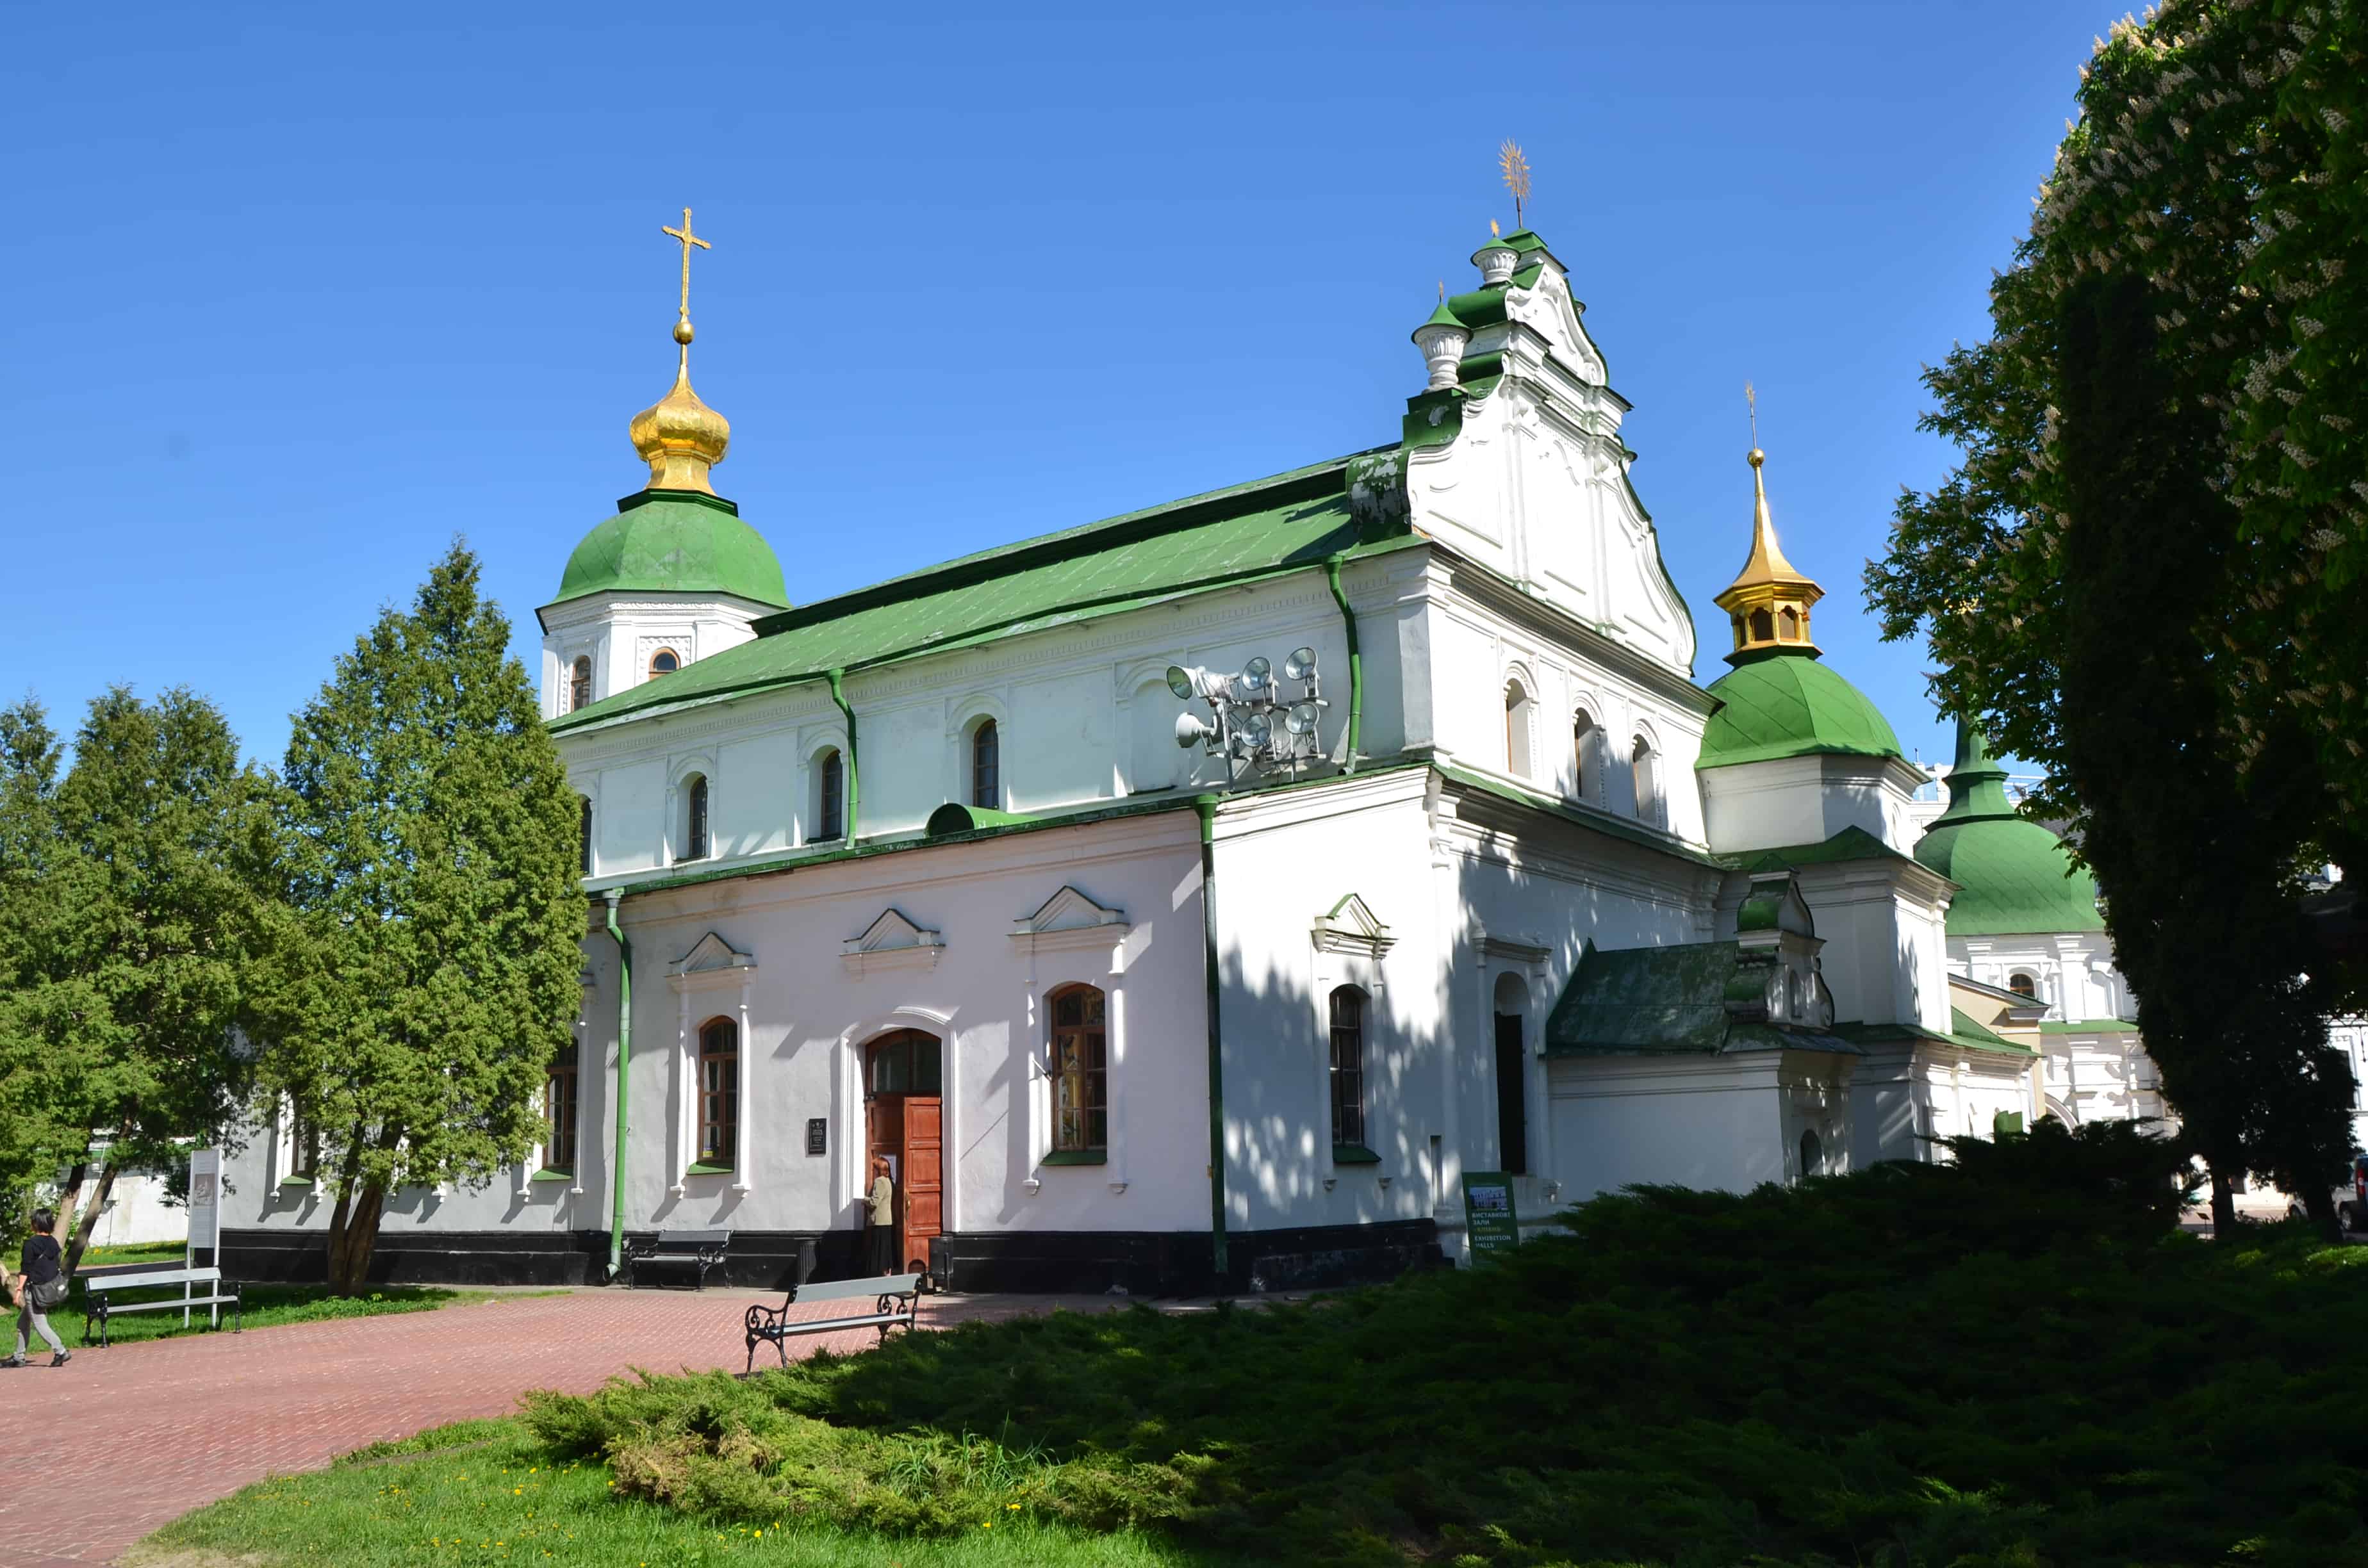 Refectory Church at Saint Sophia Cathedral complex in Kyiv, Ukraine